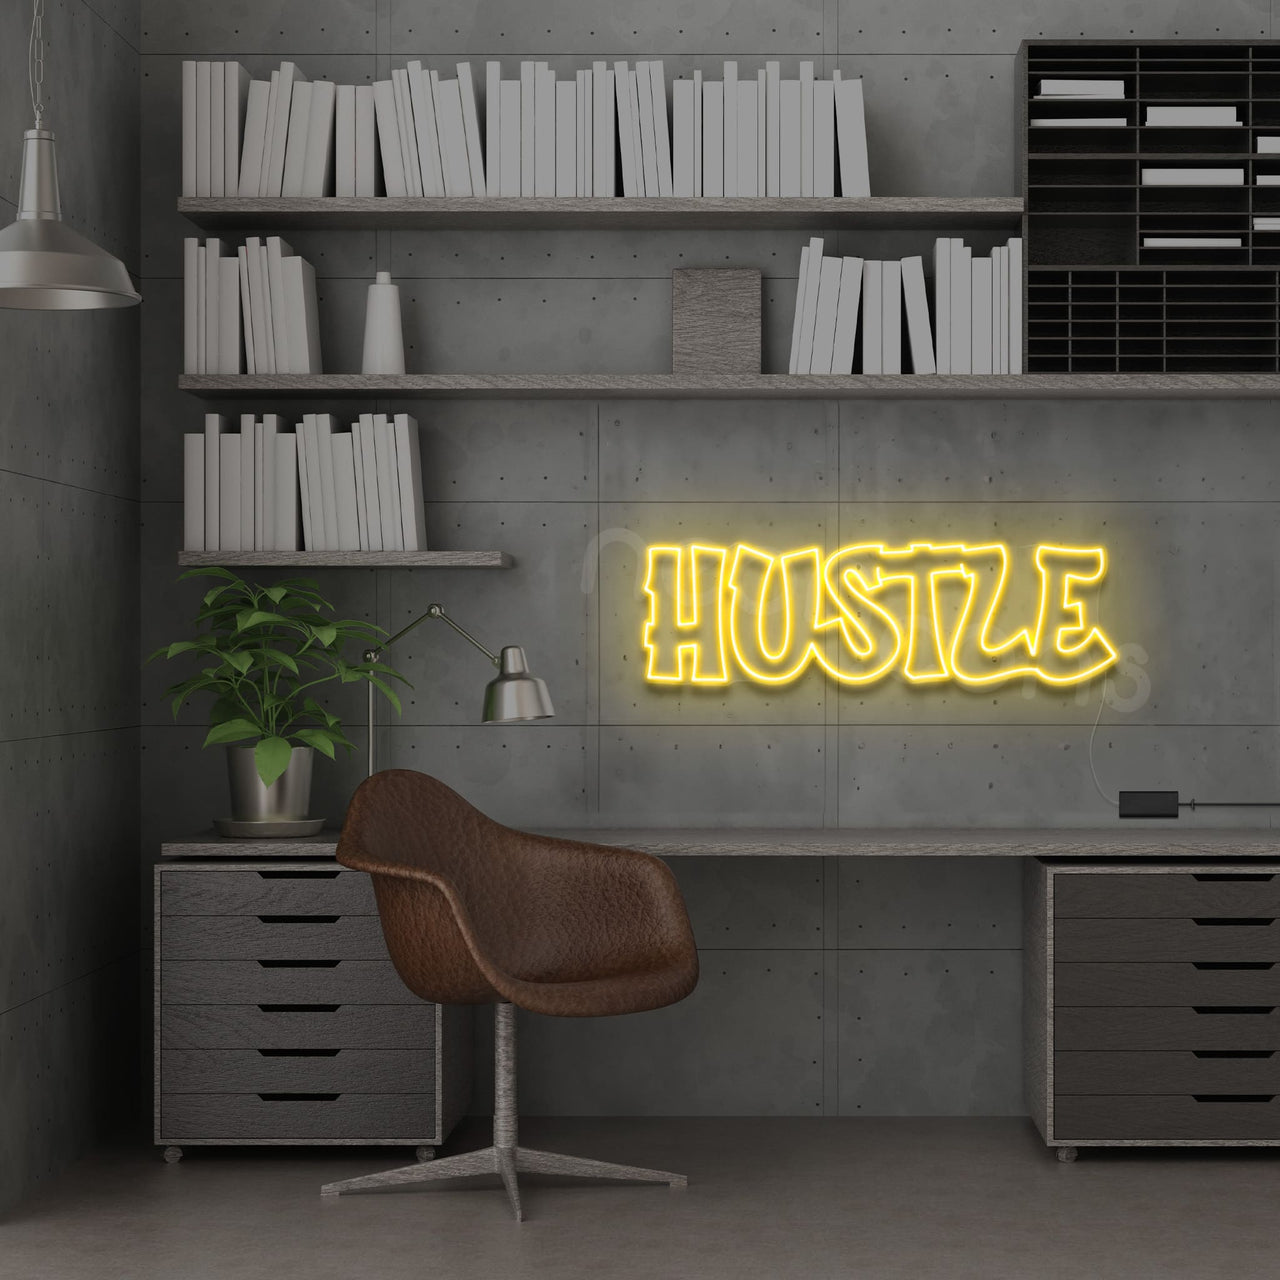 "Hustle" Neon Sign 60cm (2ft) / Yellow / LED by Neon Icons